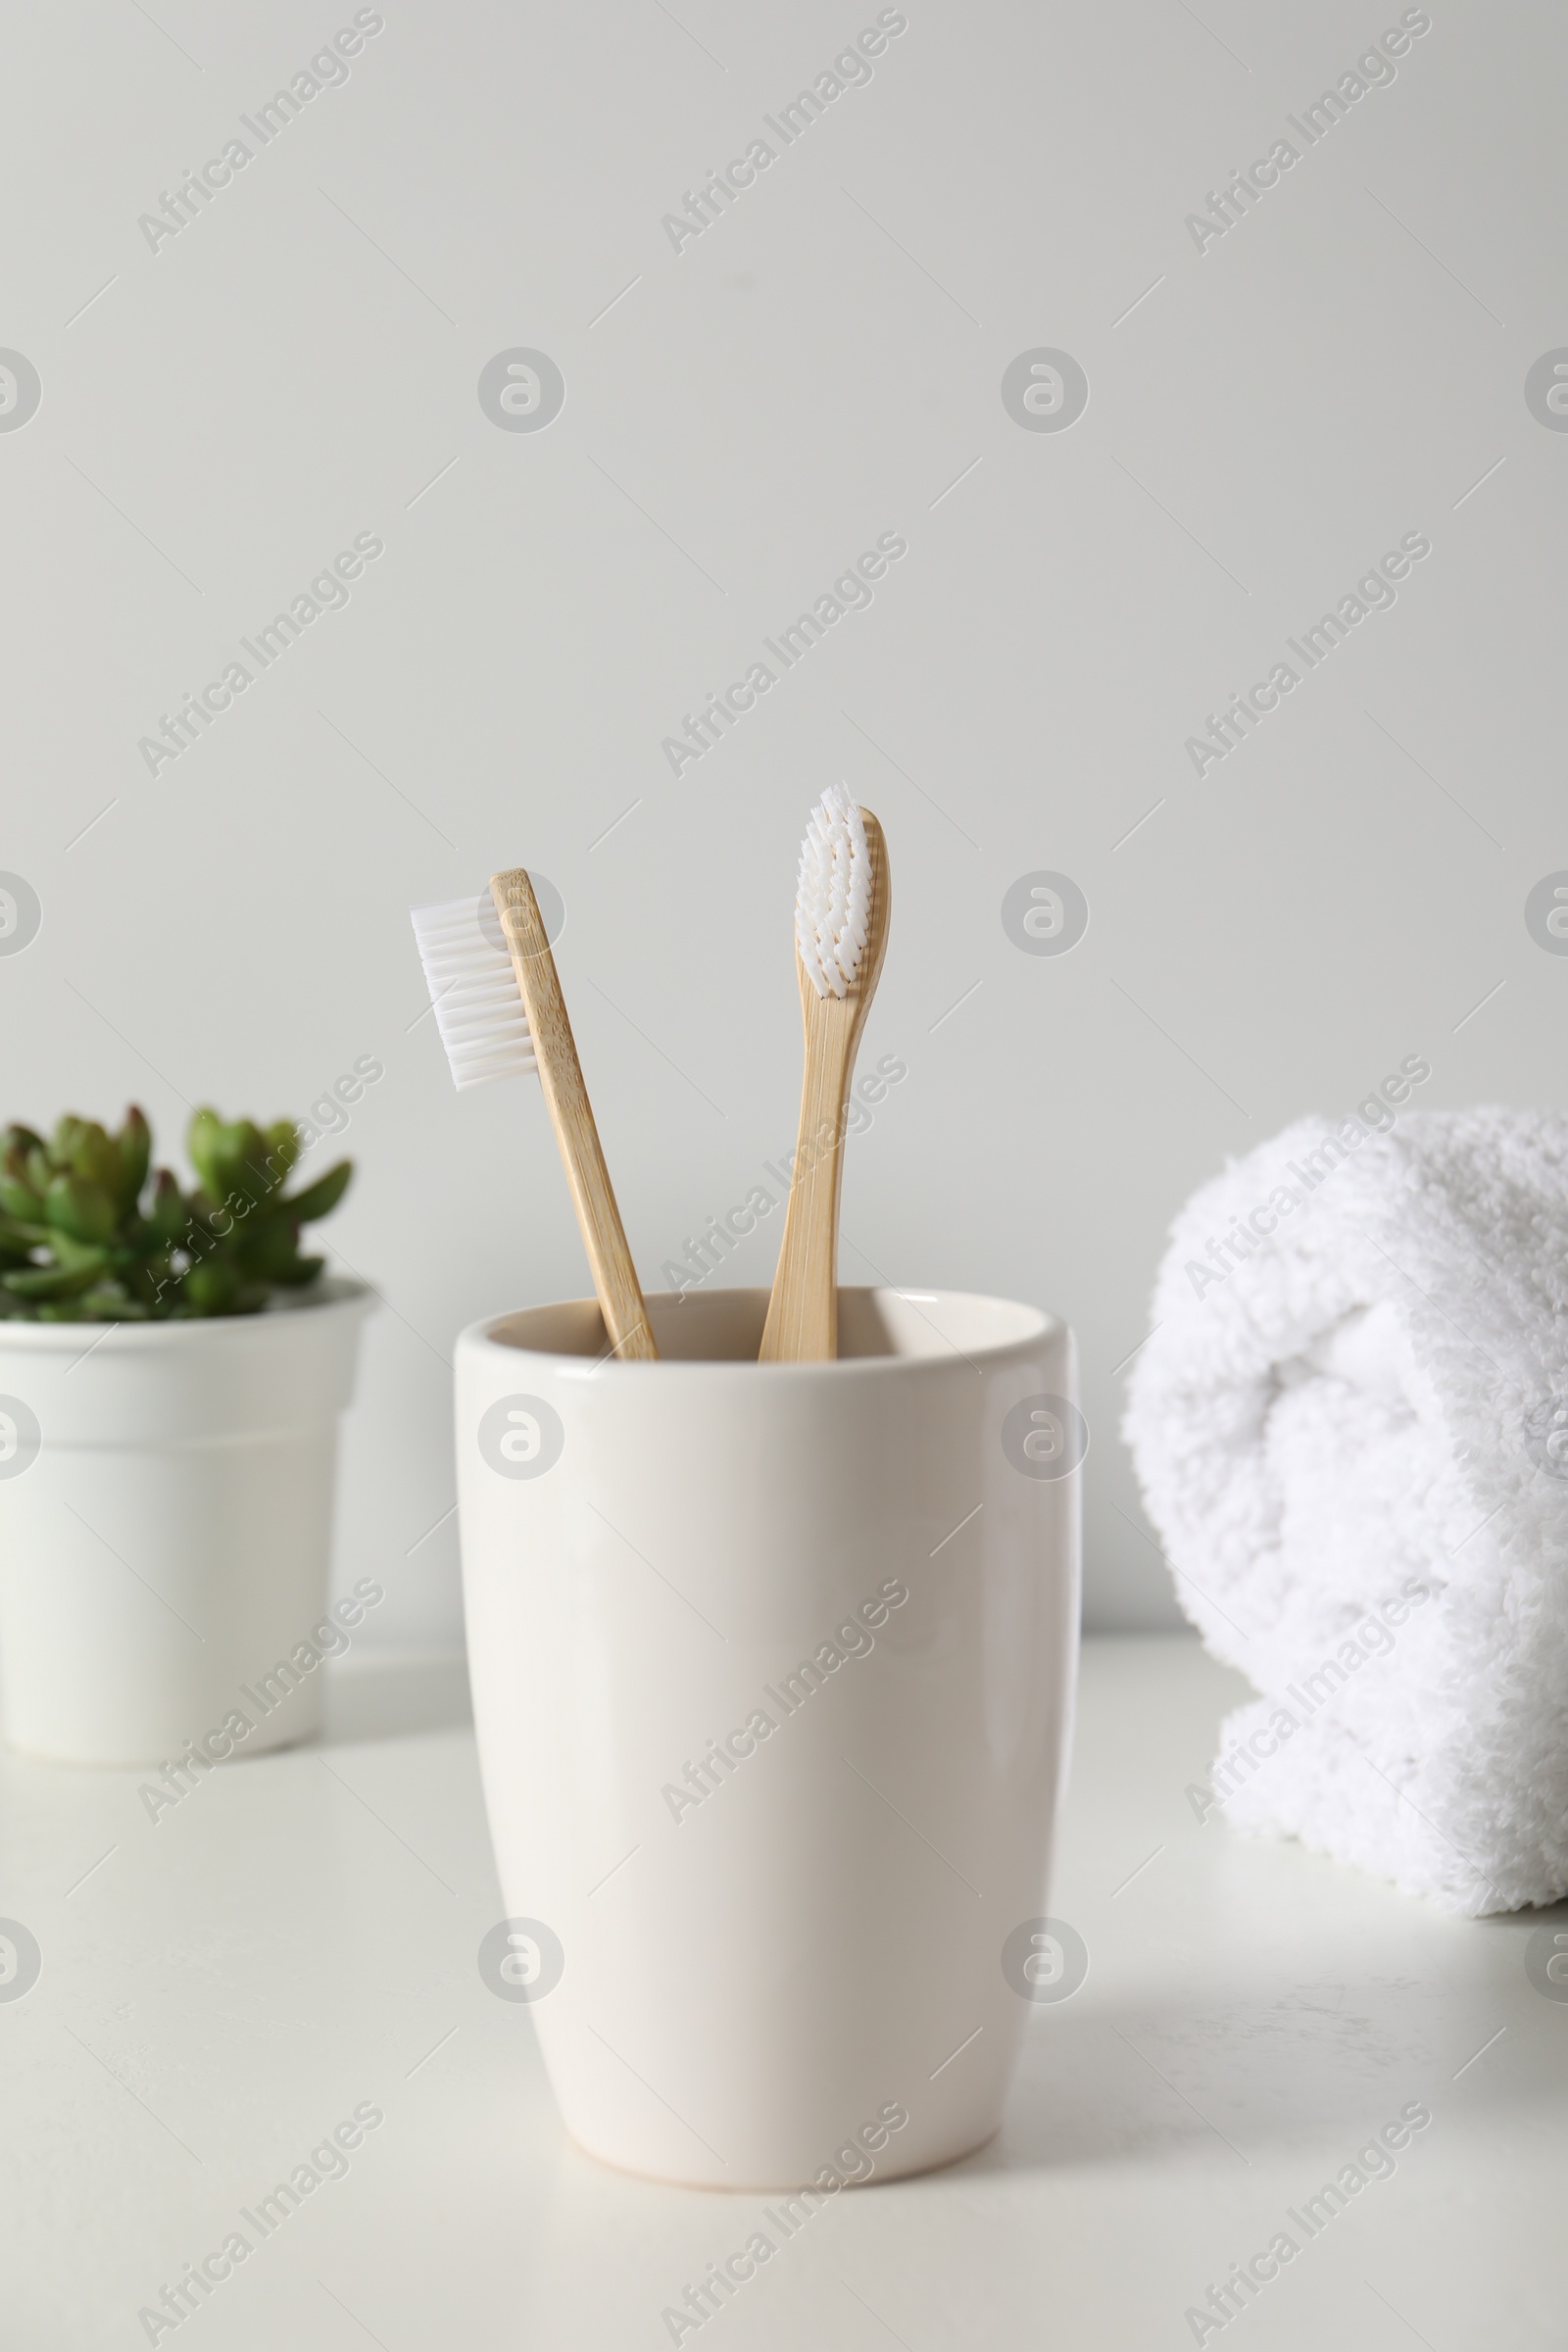 Photo of Bamboo toothbrushes in holder, potted plant and towel on white countertop